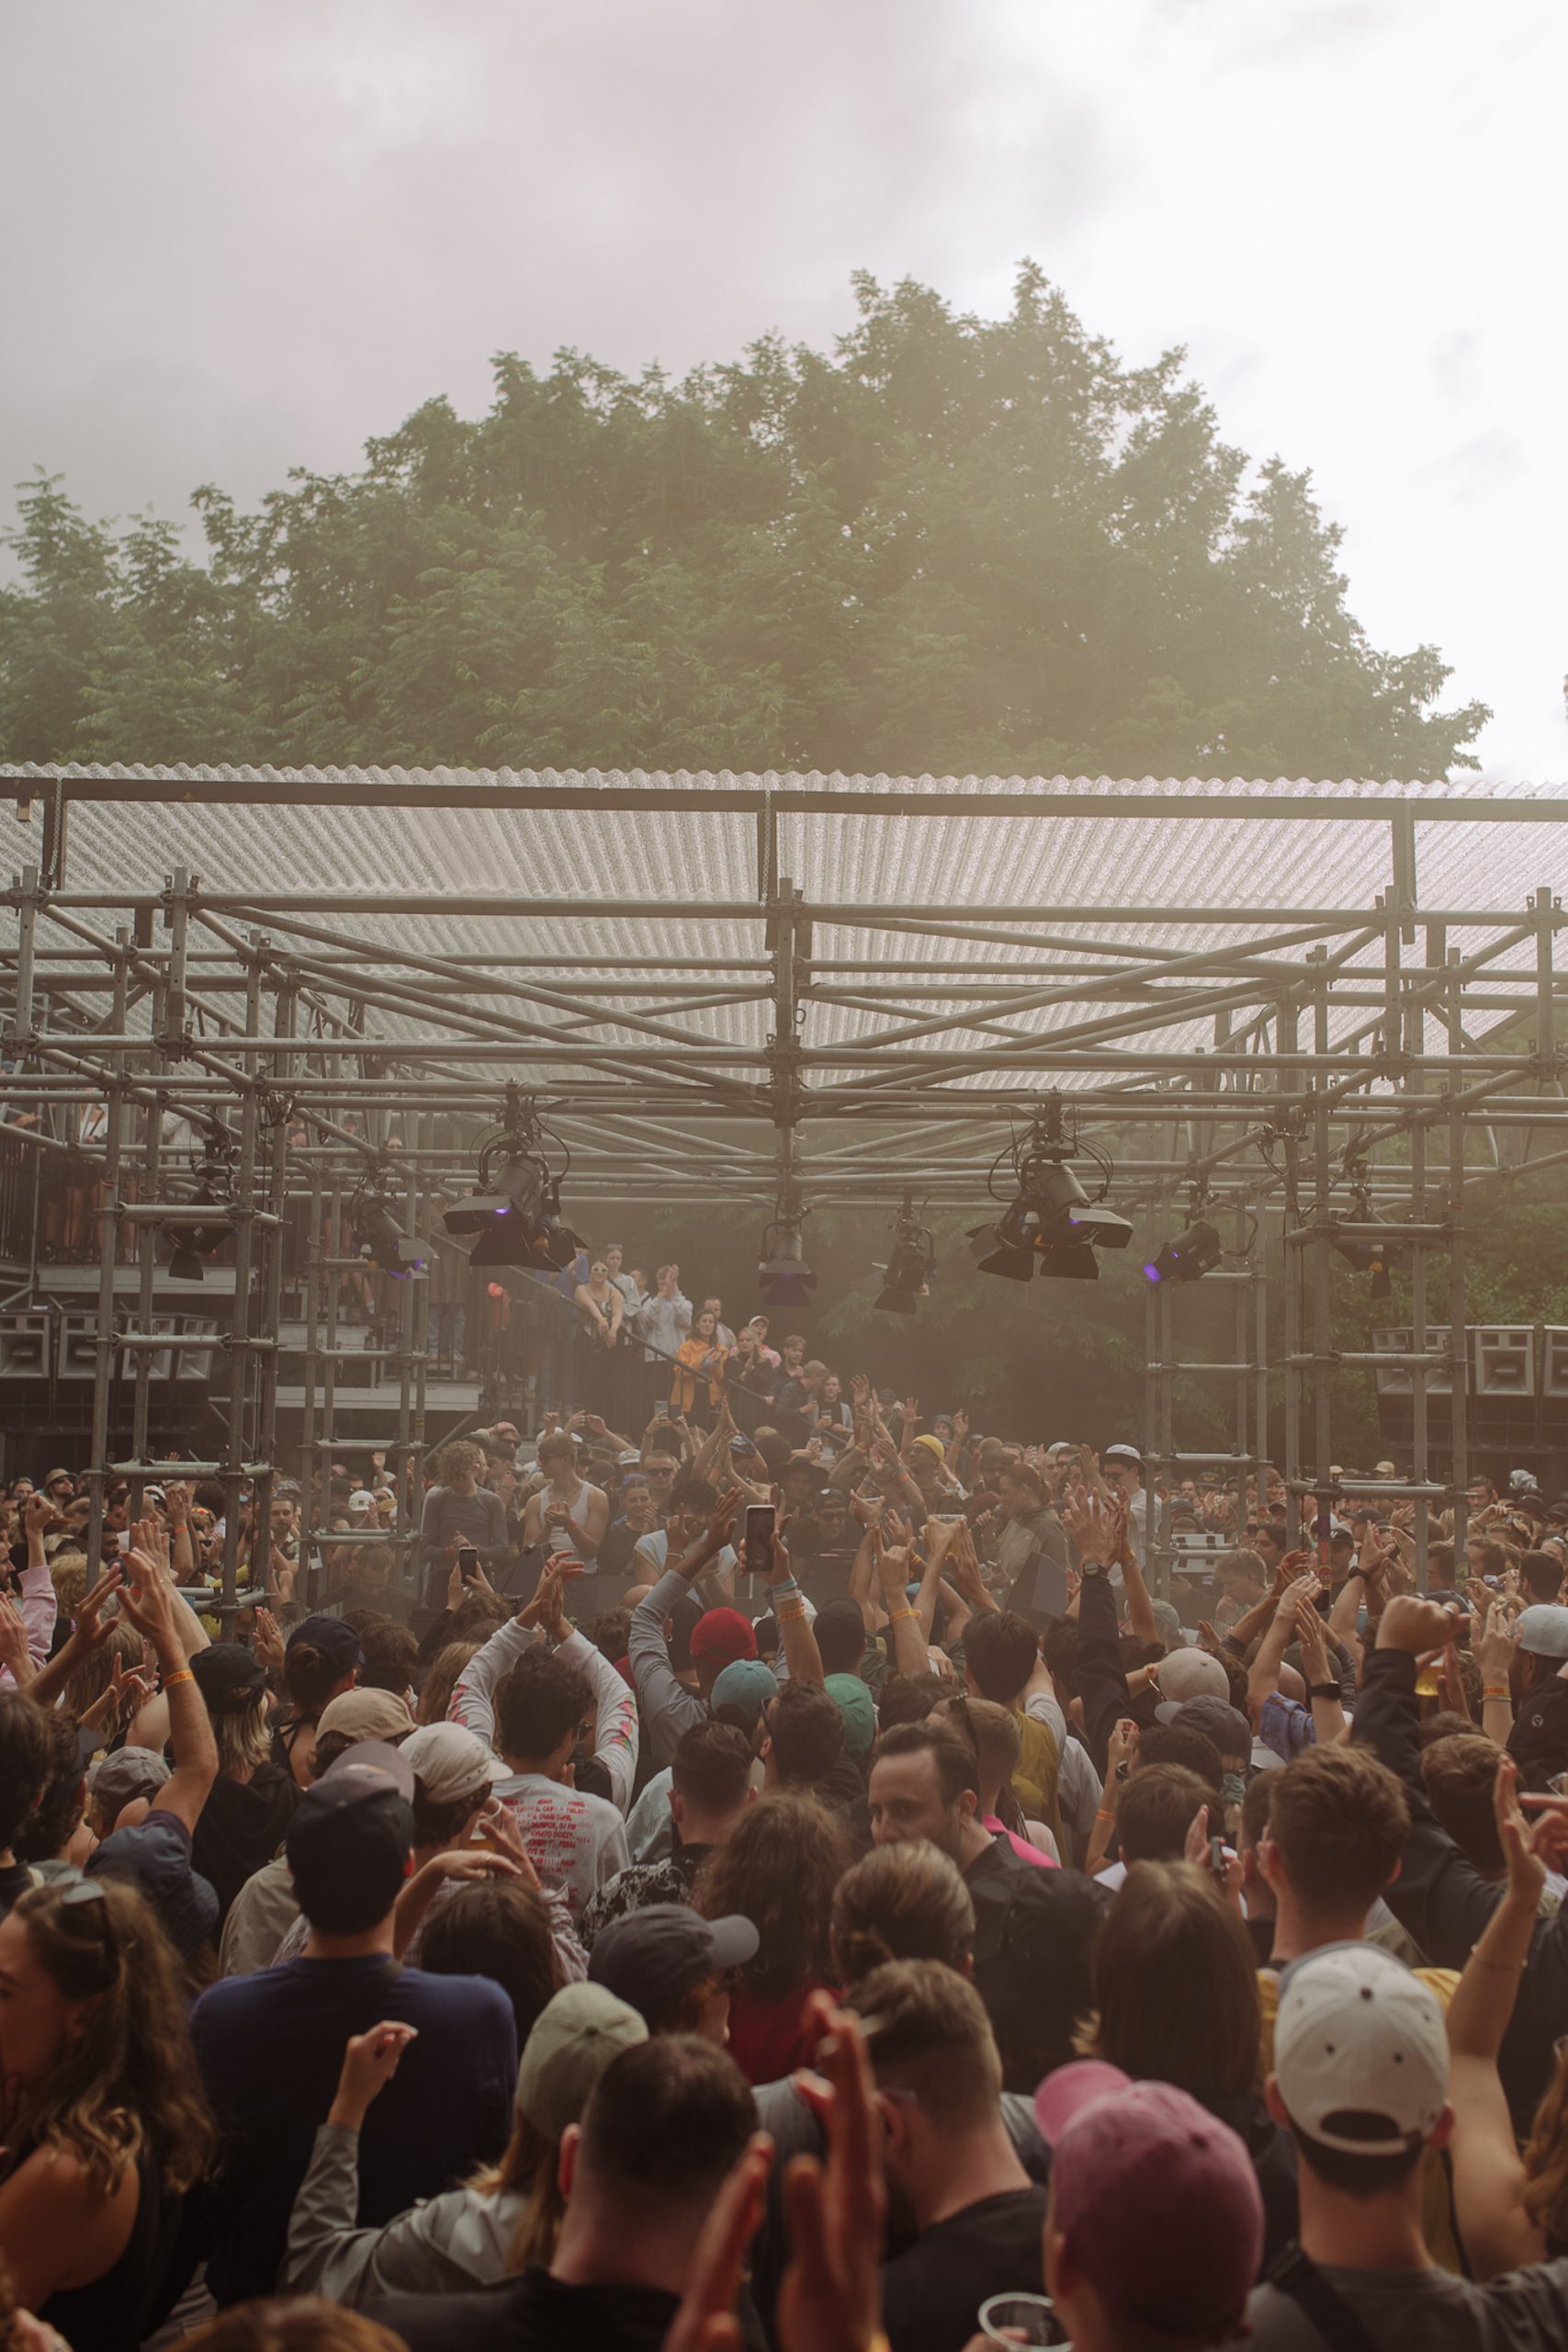 The RADAR Stage saw extraordinary enthusiasm during the festival